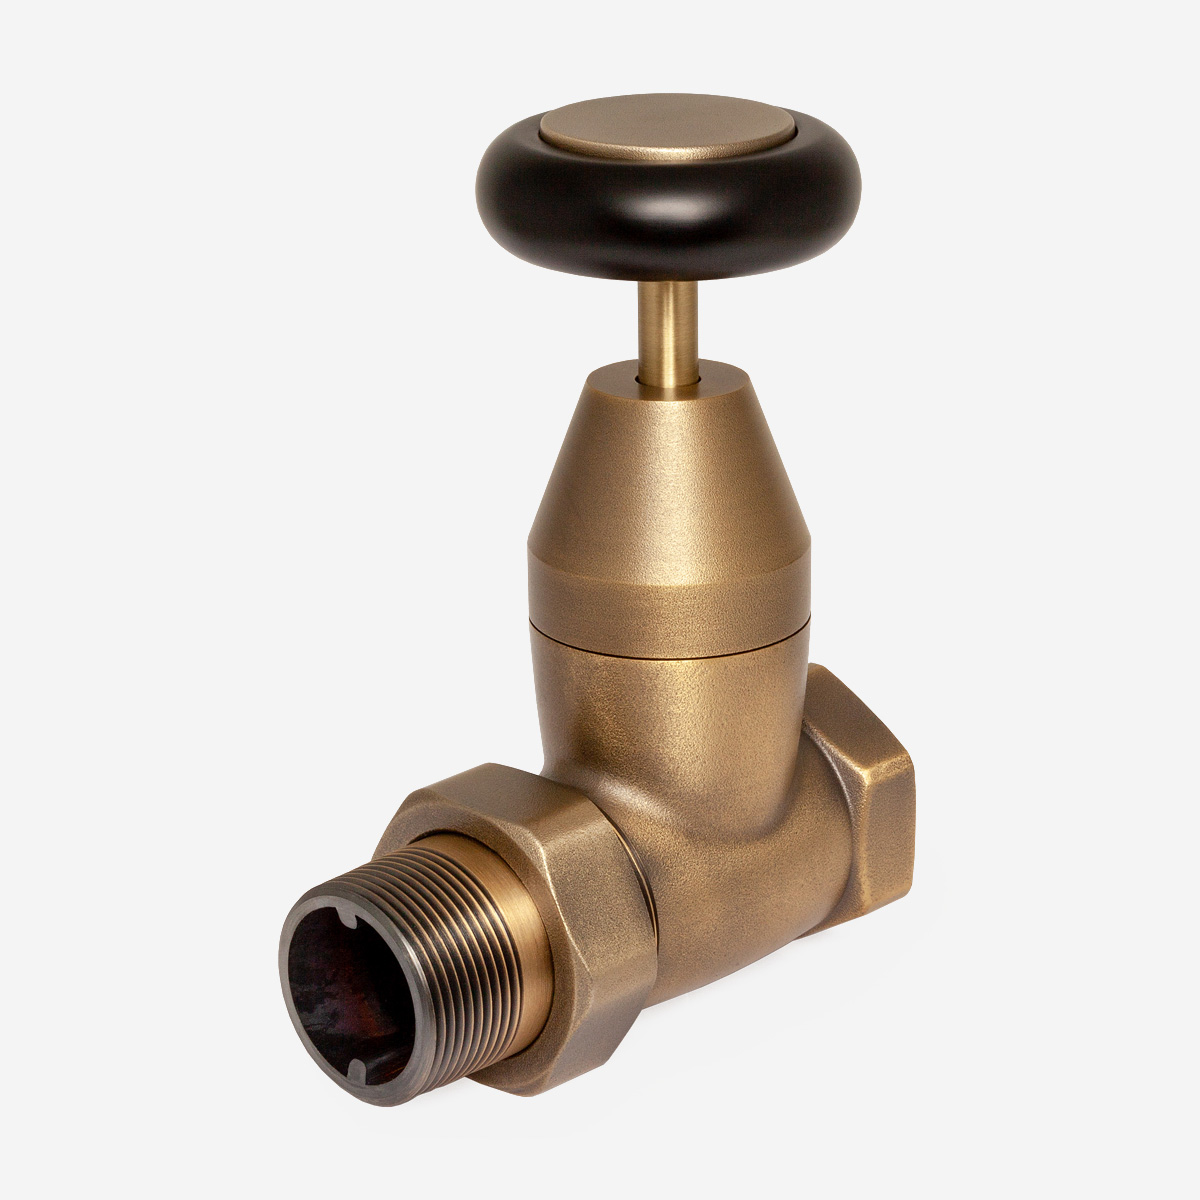 Windsor Gate Valve in Natural Brass - angled view